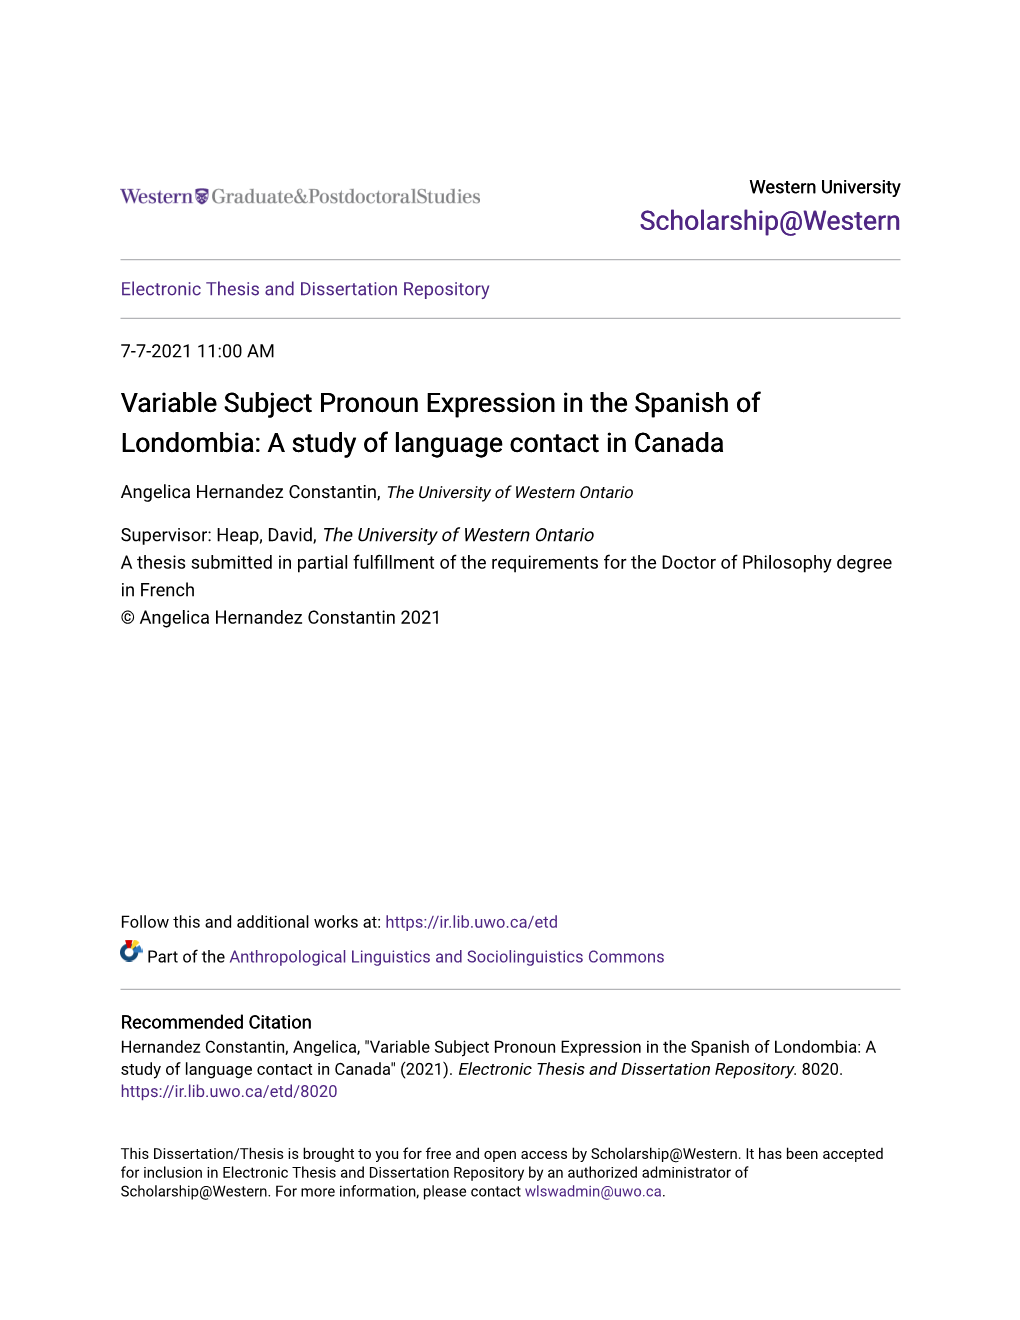 Variable Subject Pronoun Expression in the Spanish of Londombia: a Study of Language Contact in Canada